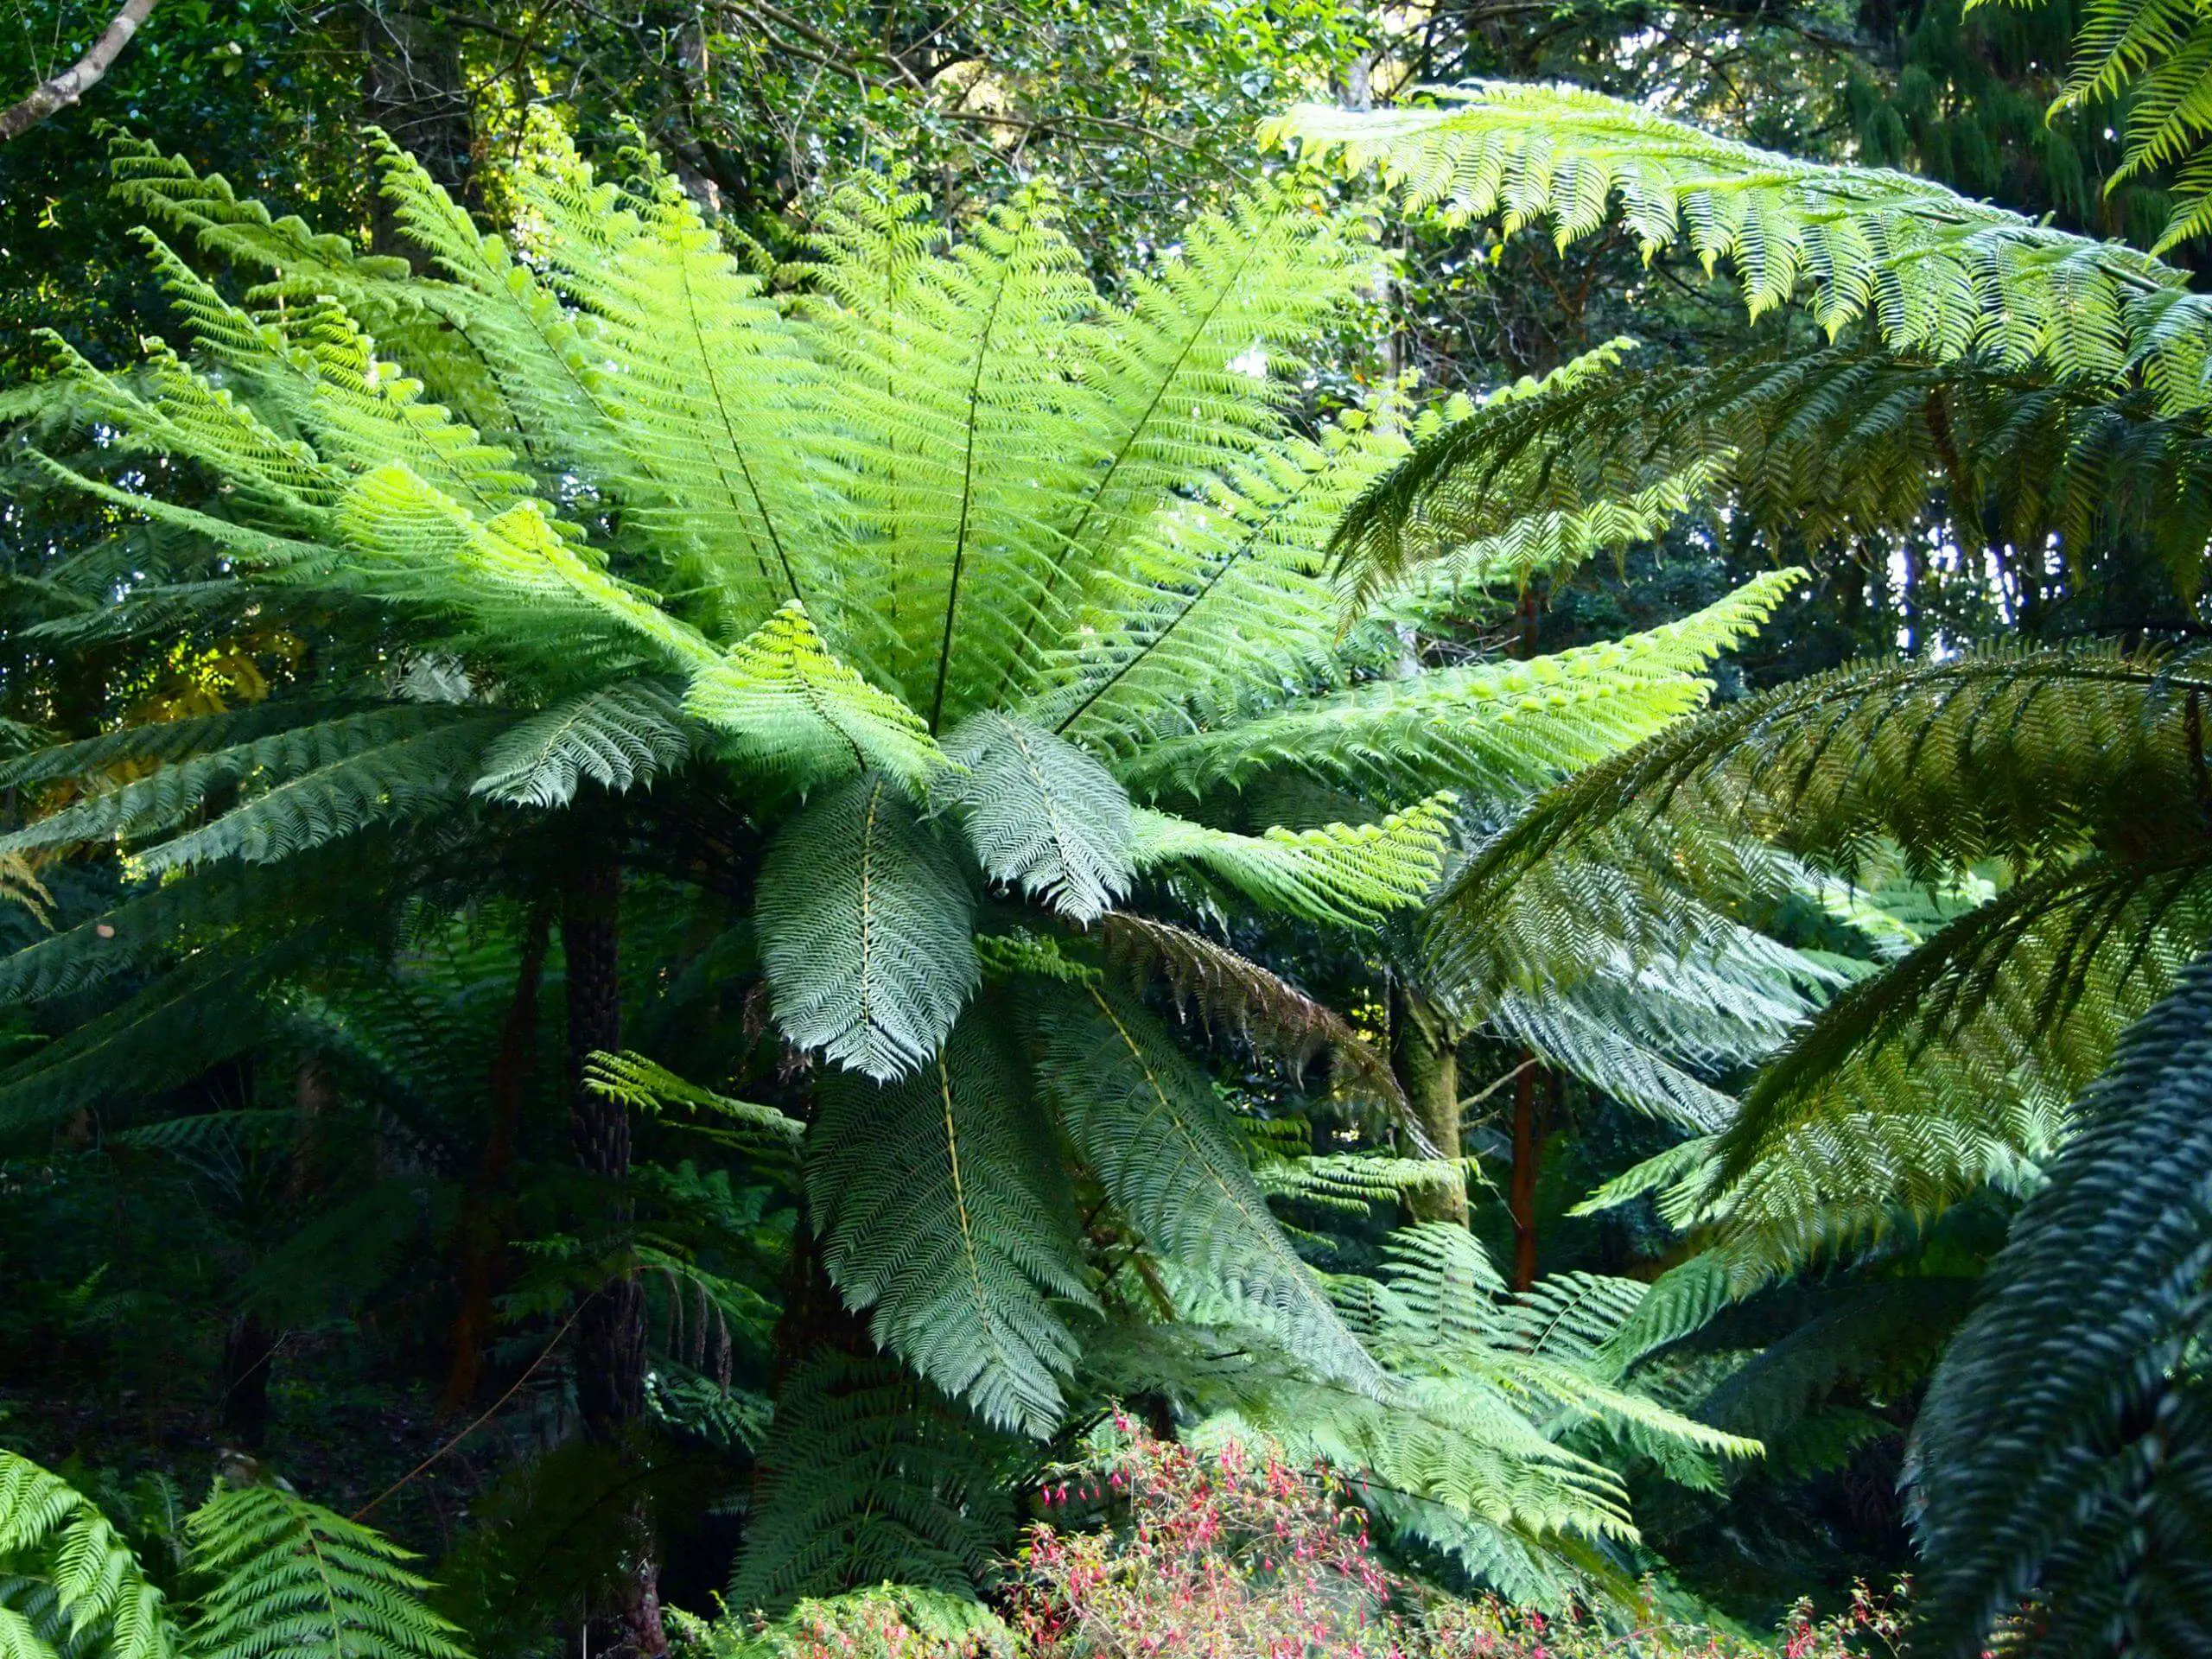 Ferns grow best when given the right balance of elements such as light water and soil